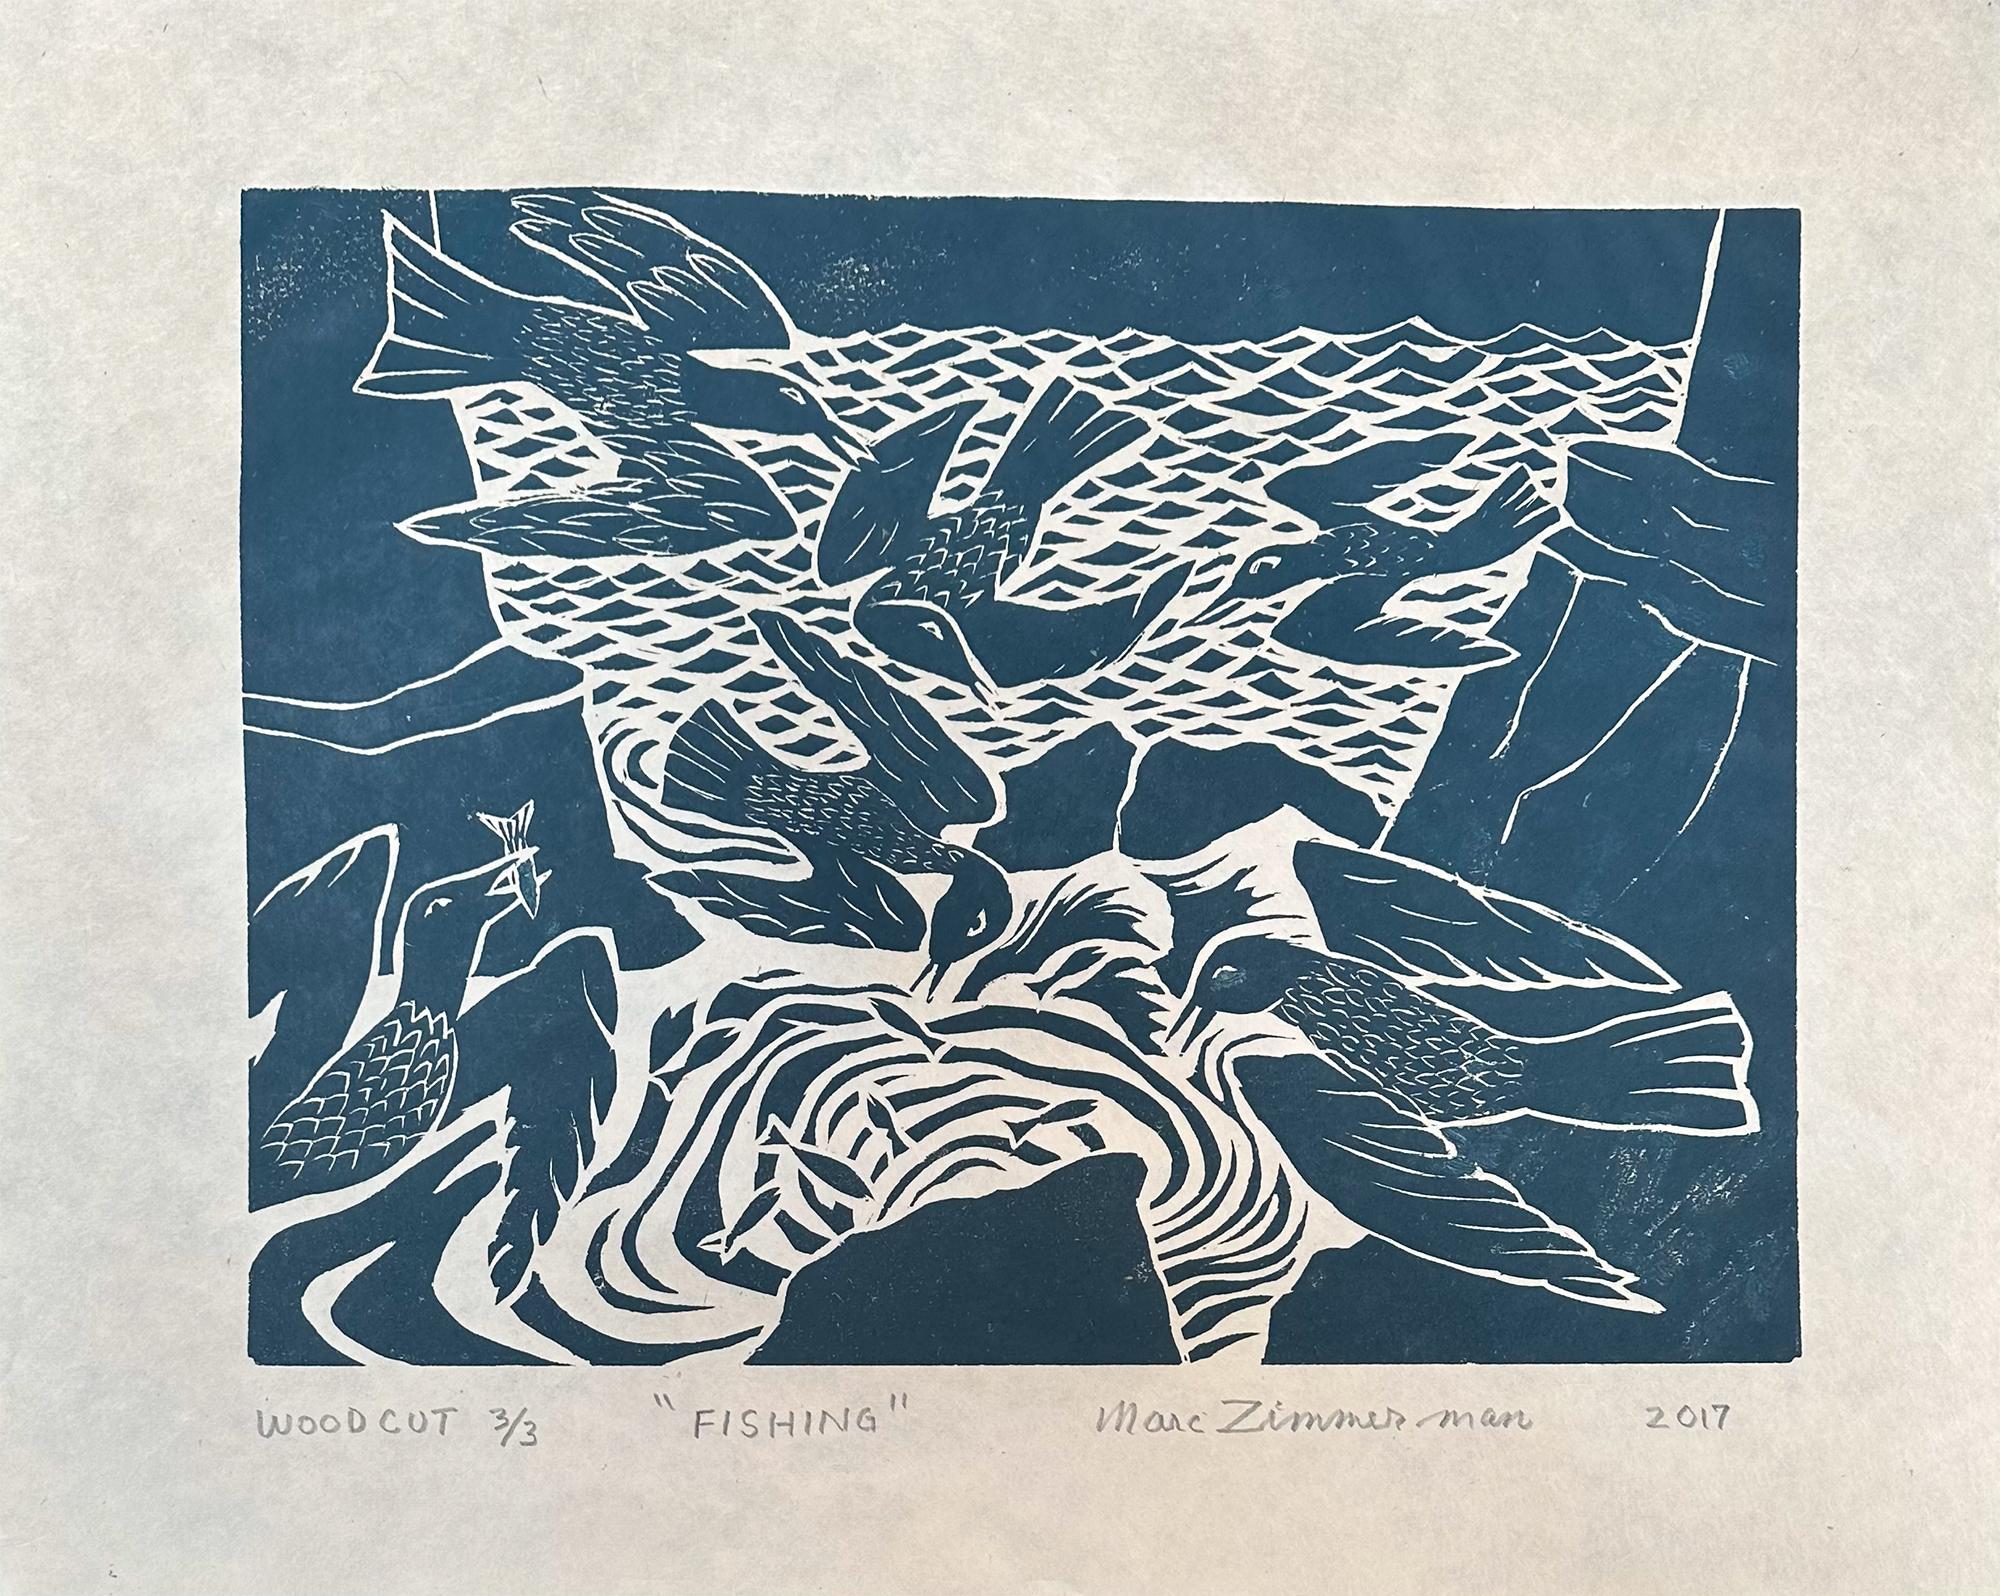 Fishing - Figurative - Woodcut Print By Marc Zimmerman

Limited Edition 01/04

This masterwork is exhibited in the Zimmerman Gallery, Carmel CA.

Immerse yourself in the captivating world of surfing and ocean vibes with Marc Zimmerman's remarkable